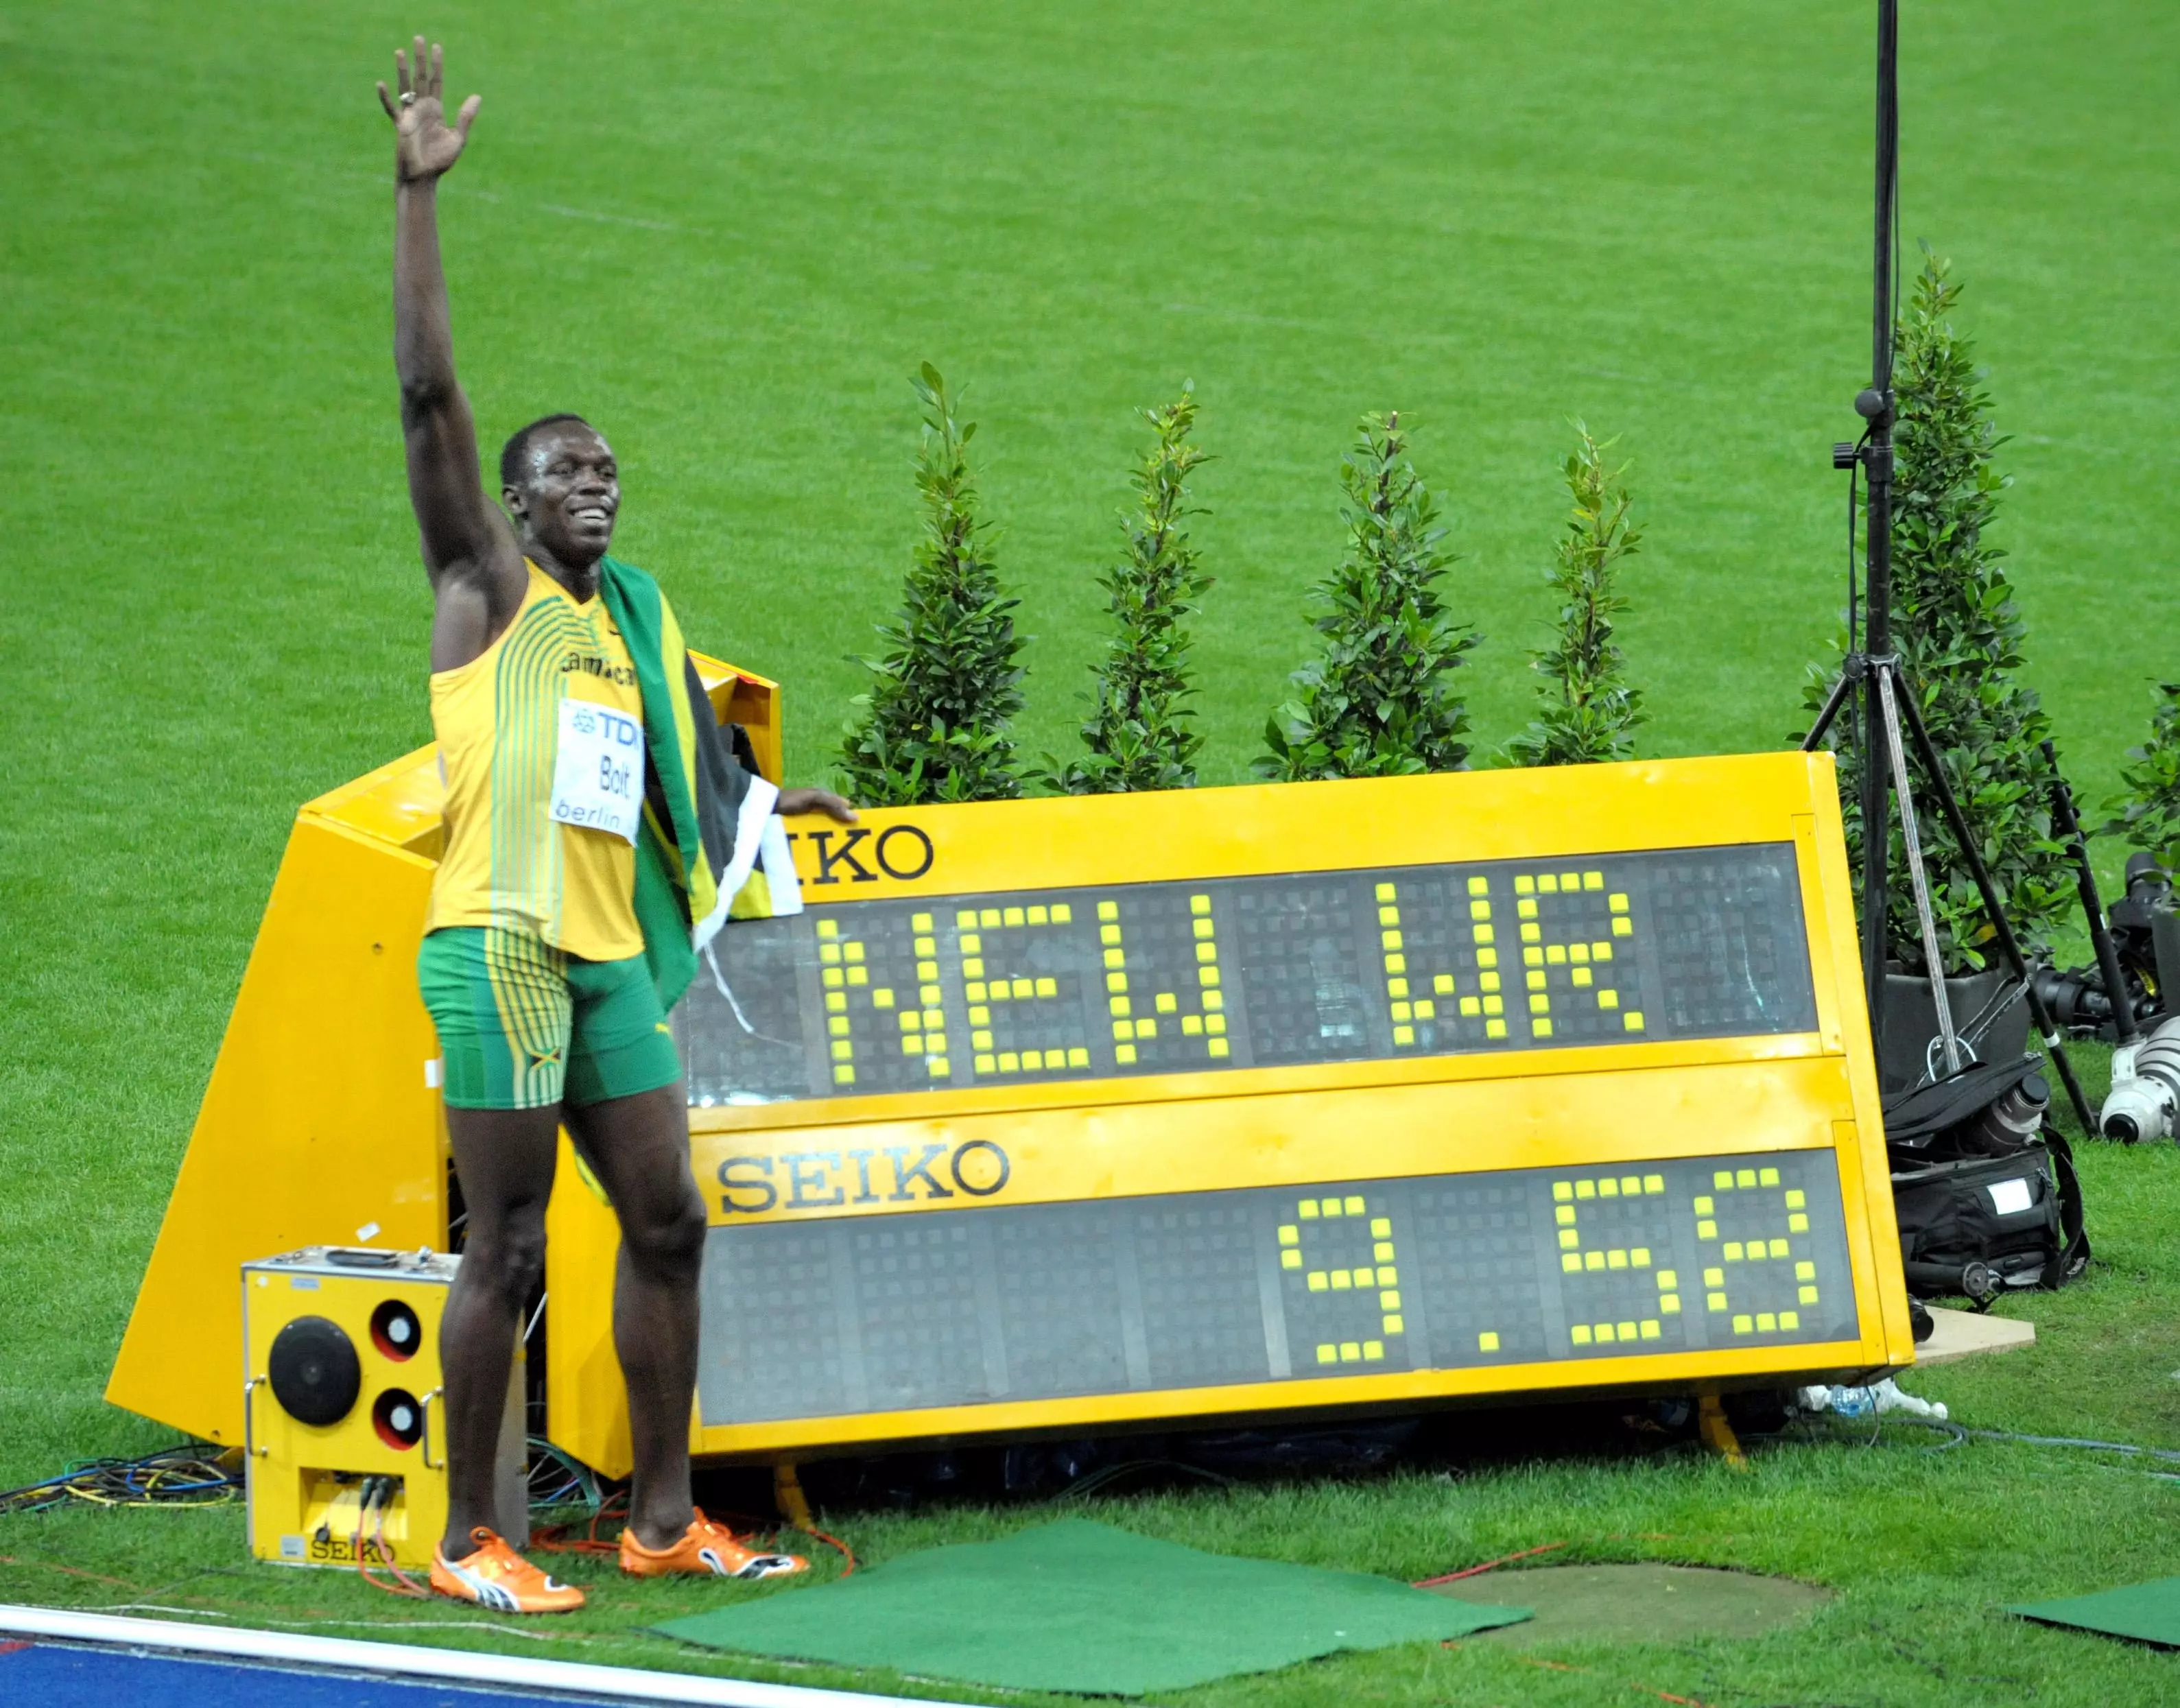 Bolt poses next to the screen showing his world record time.